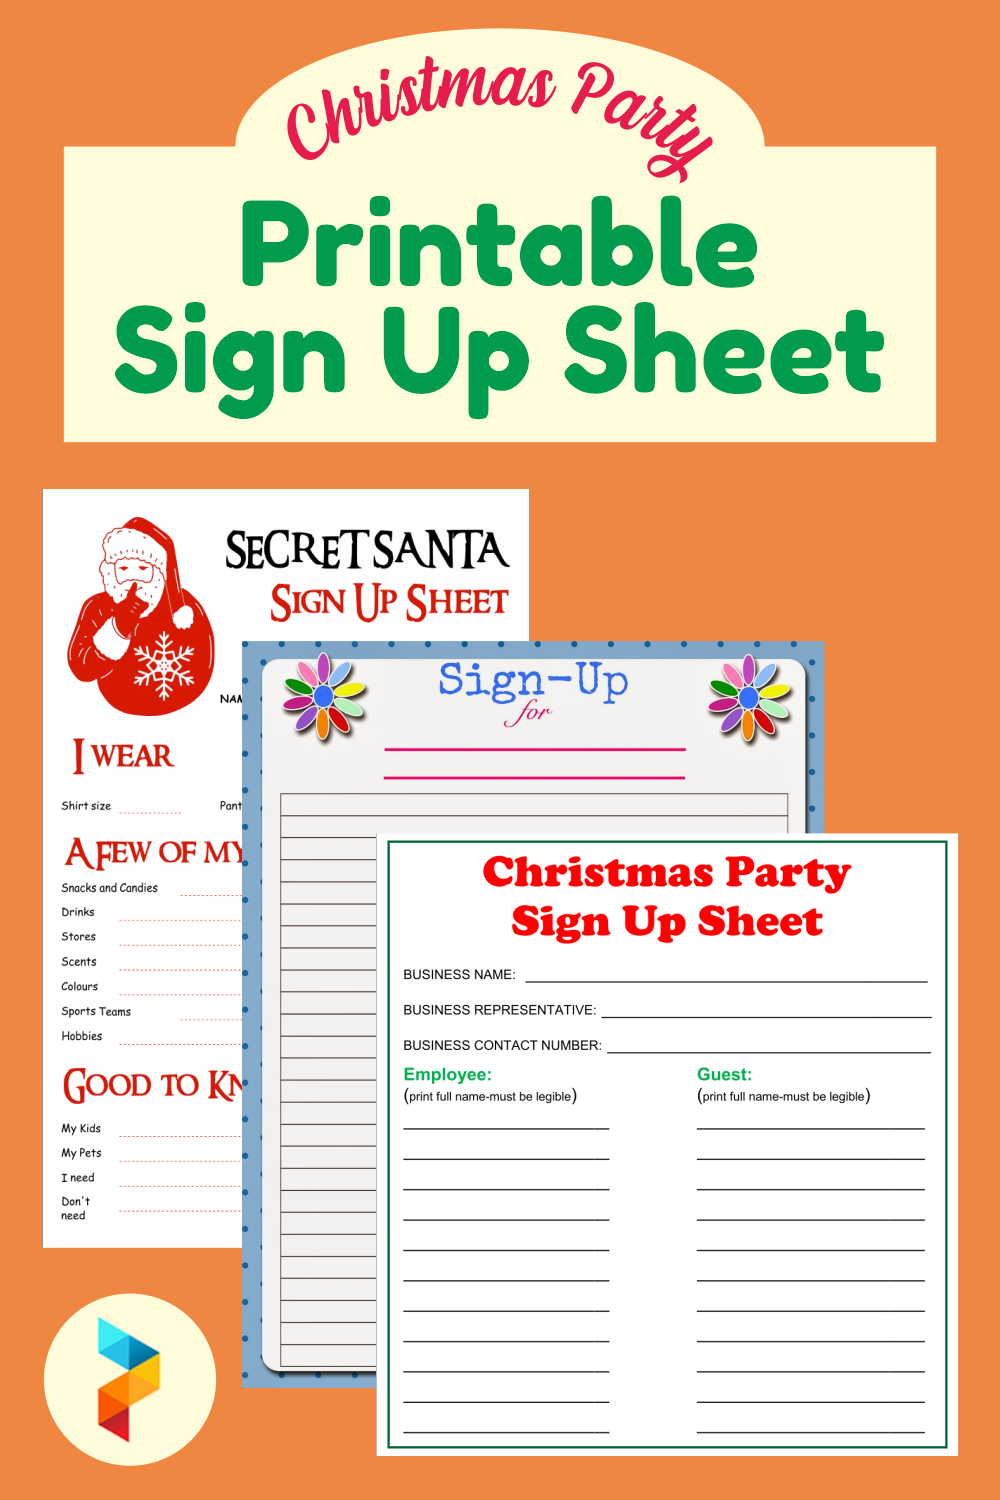 Christmas Party Printable Sign Up Sheet